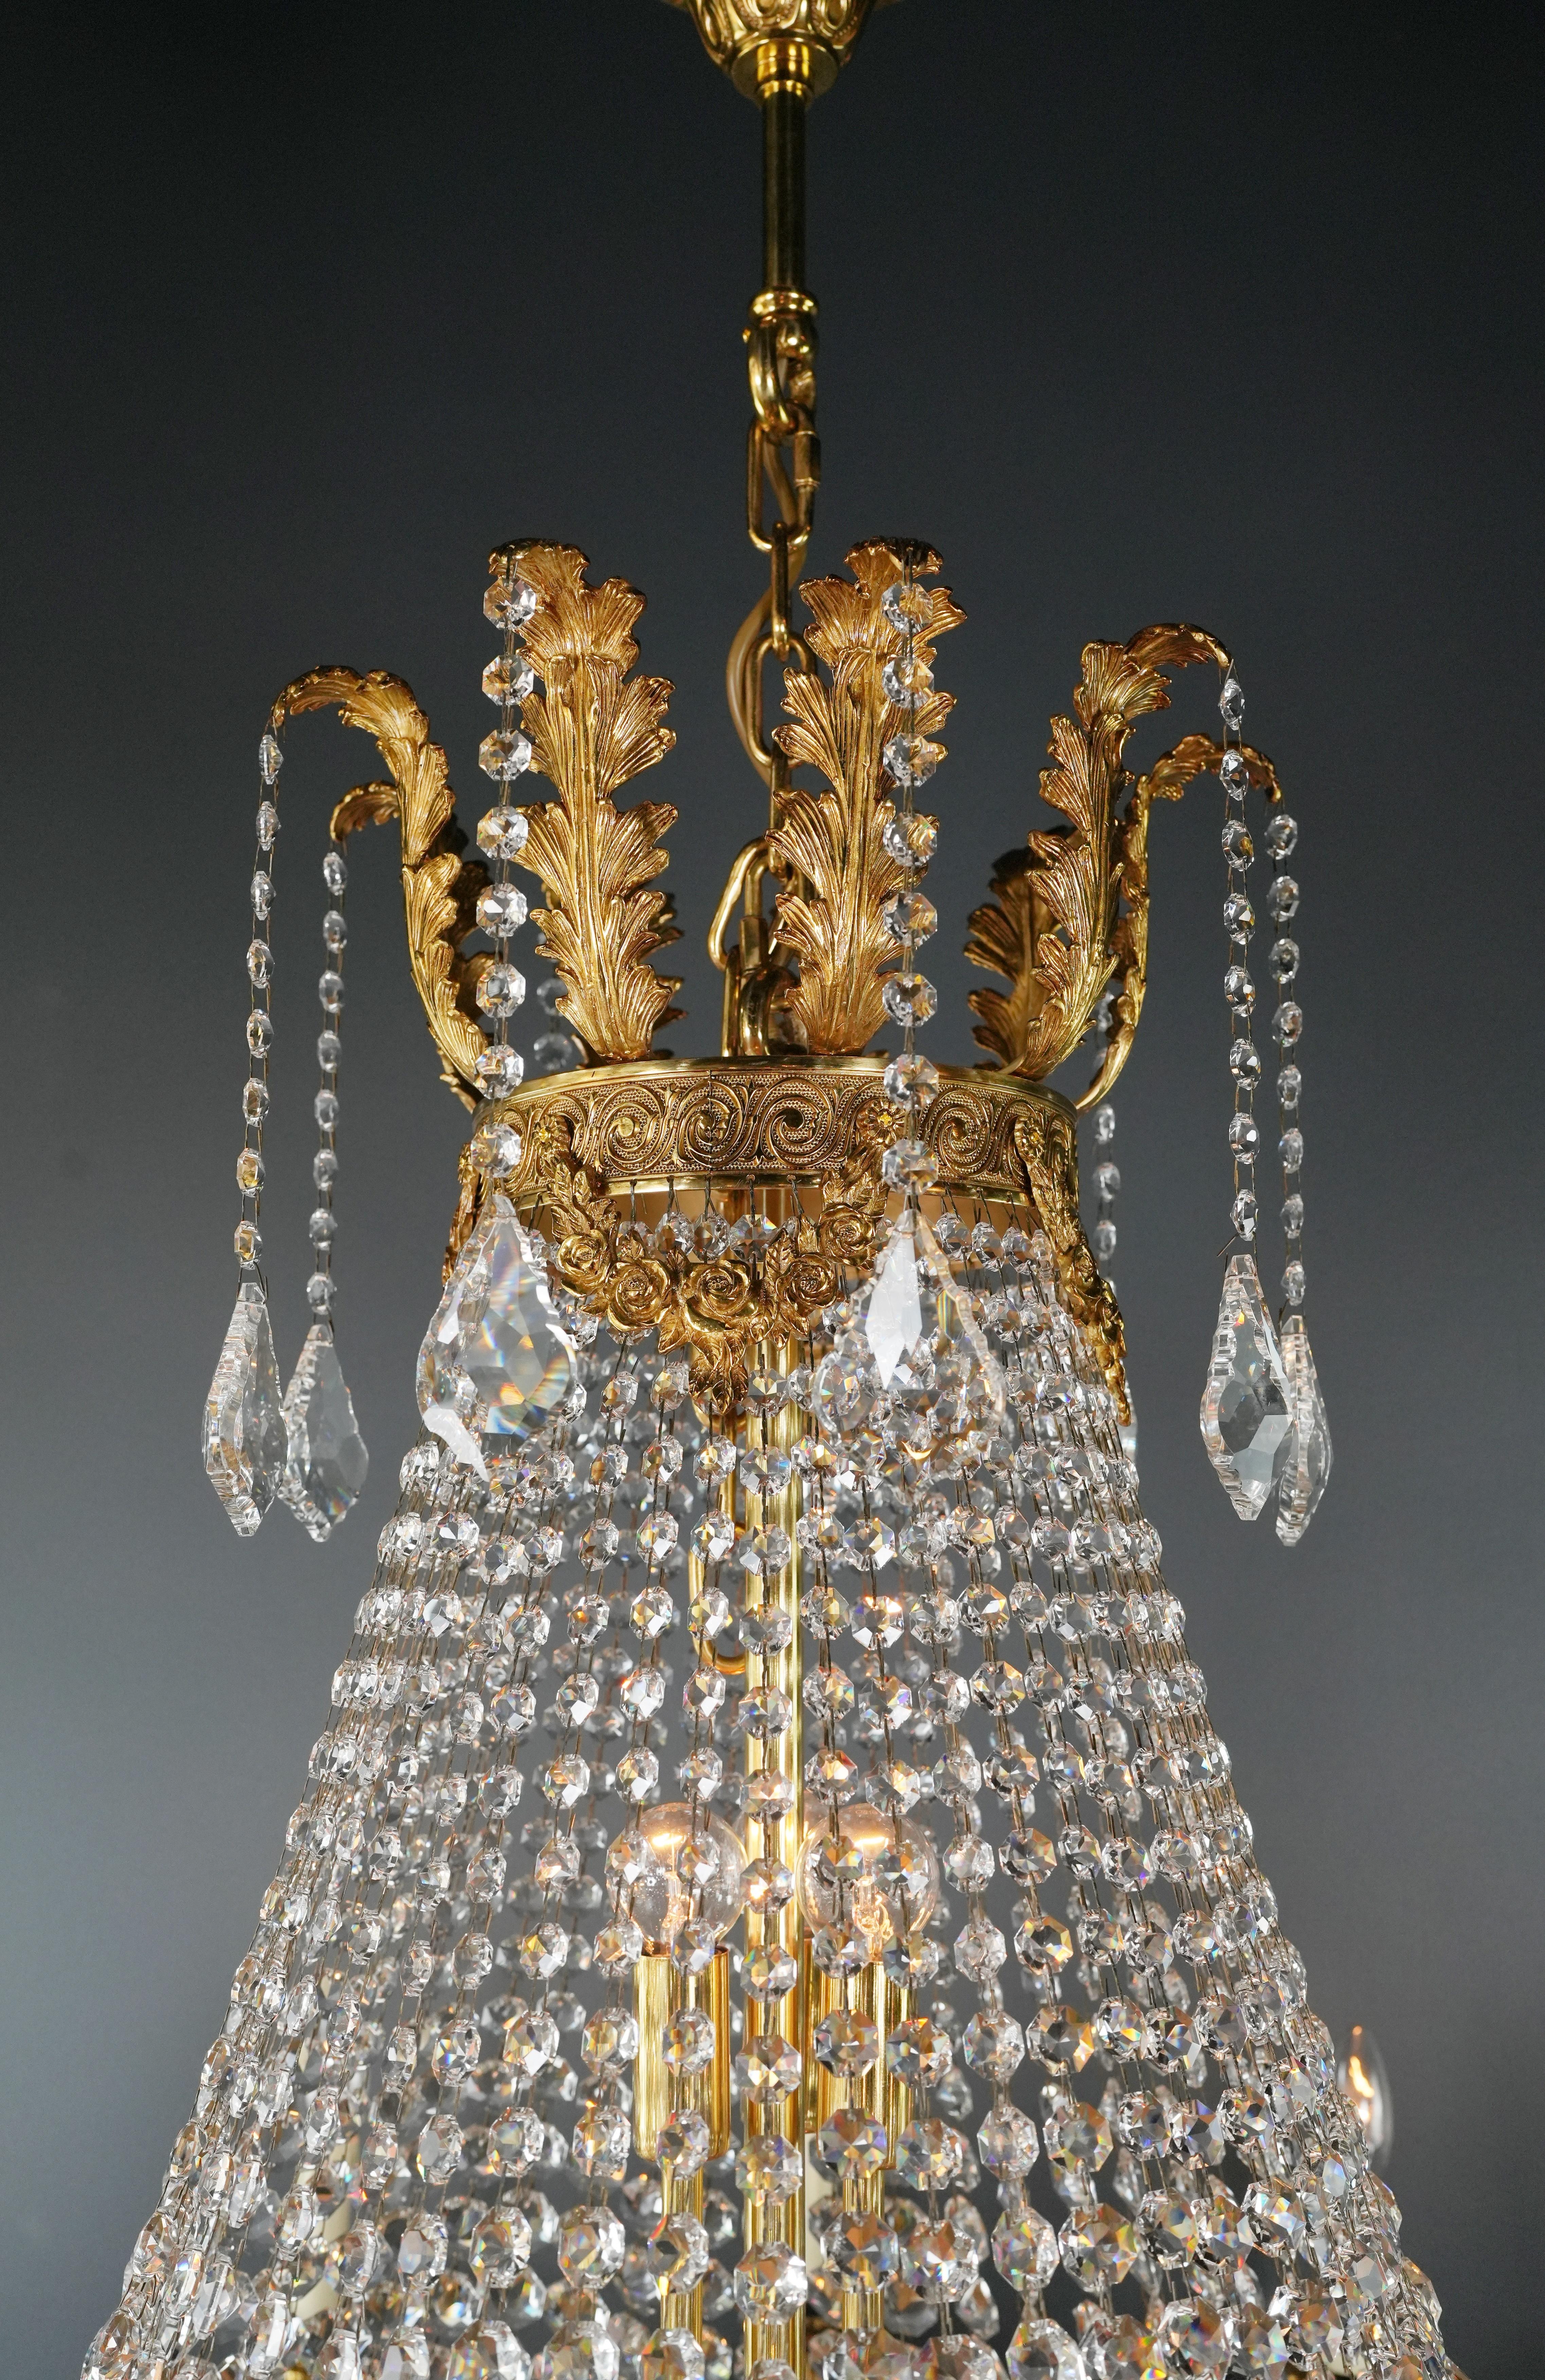 Wreat Brass Basket Empire Sac a Pearl Chandelier Crystal and Antique Gold For Sale 2